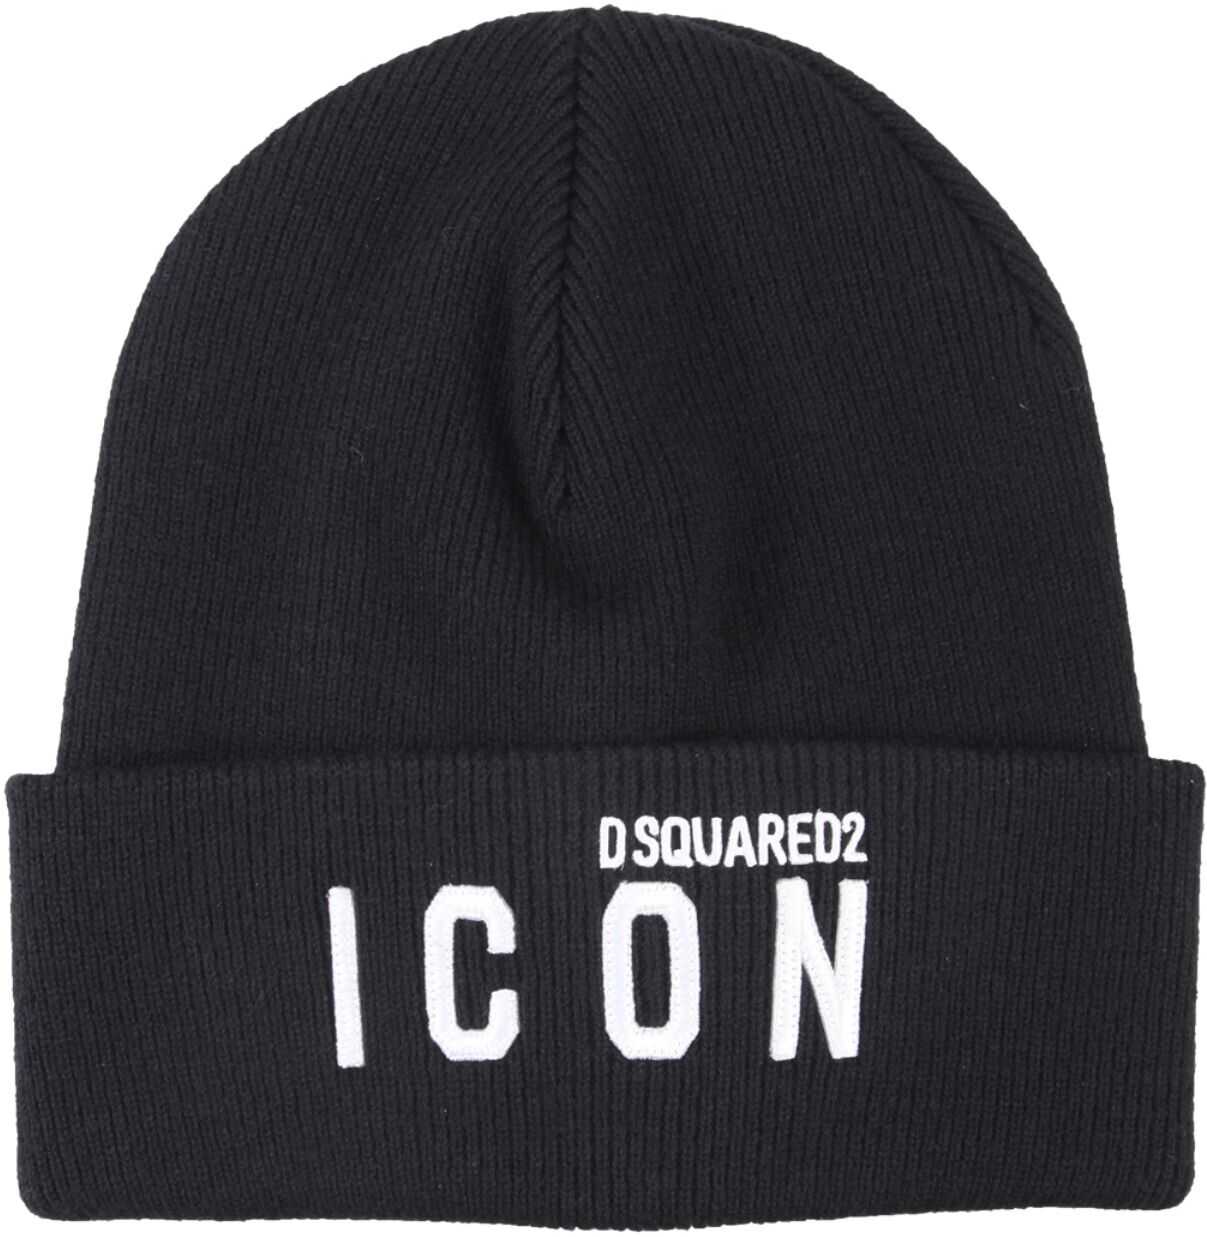 DSQUARED2 Knitted Hat KNM0001_01W04331M063 BLACK